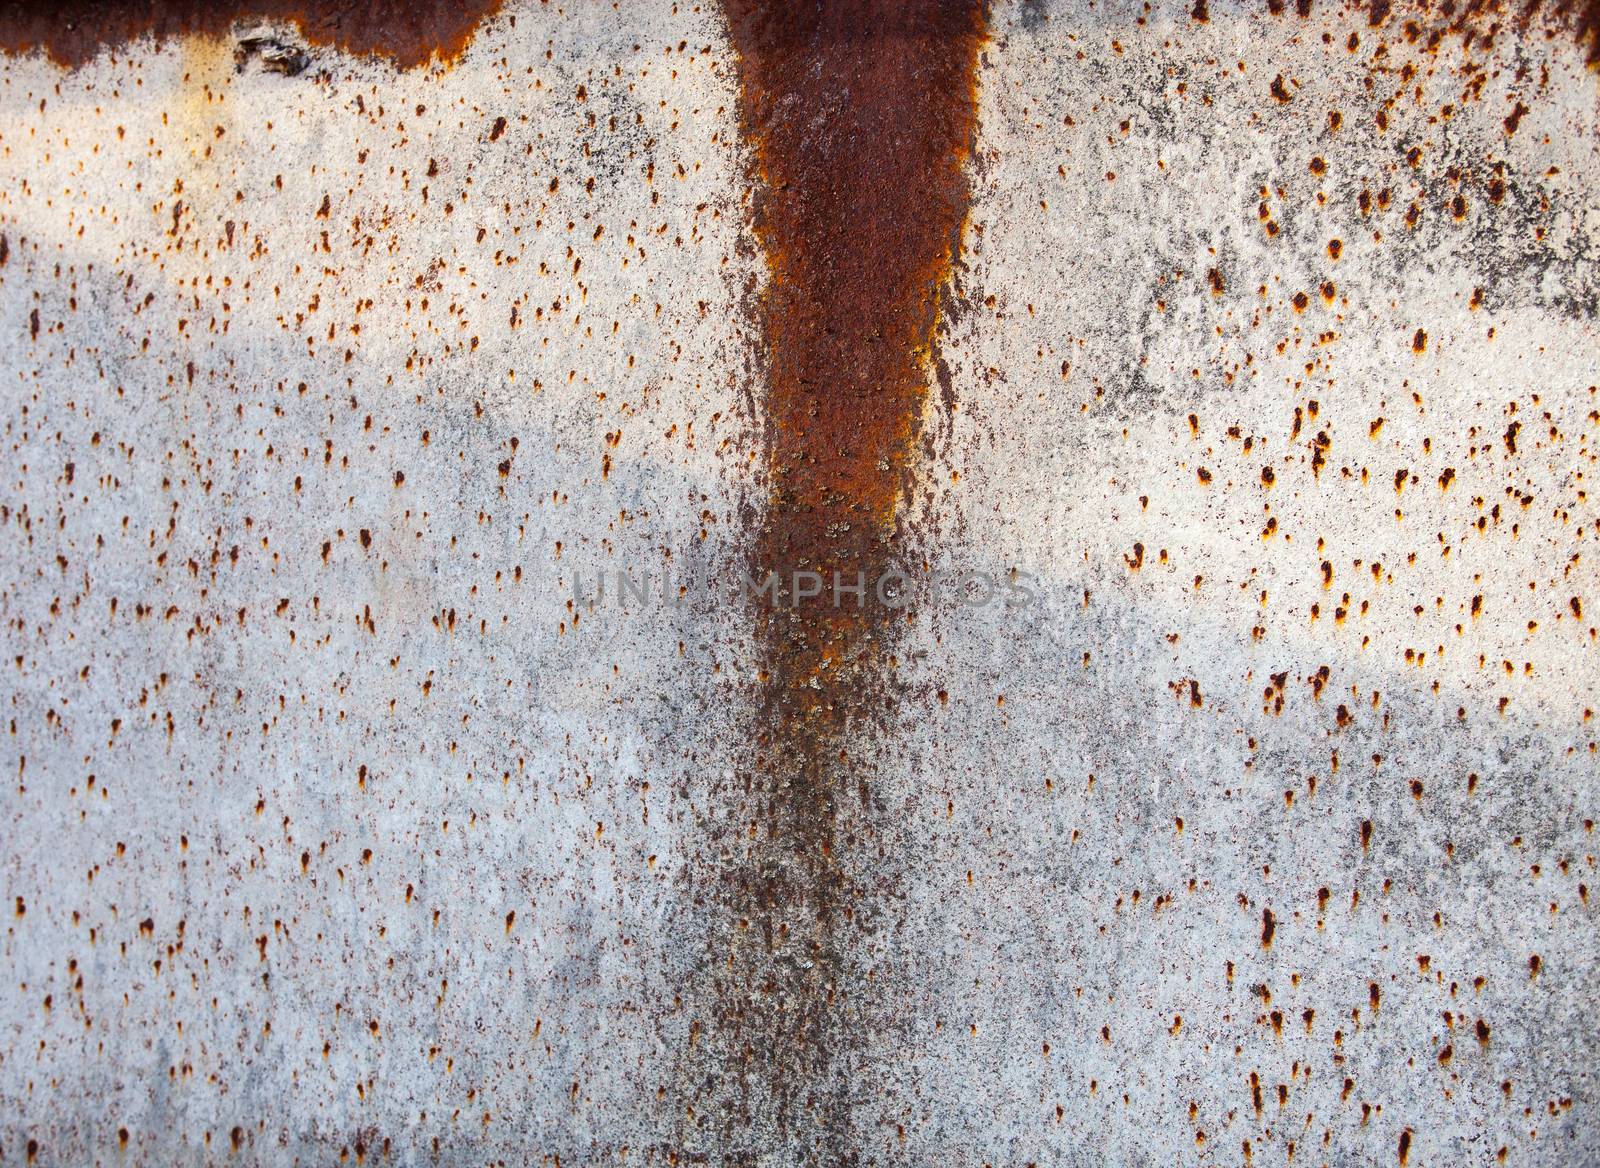 Rusty metal surface with rich and various texture